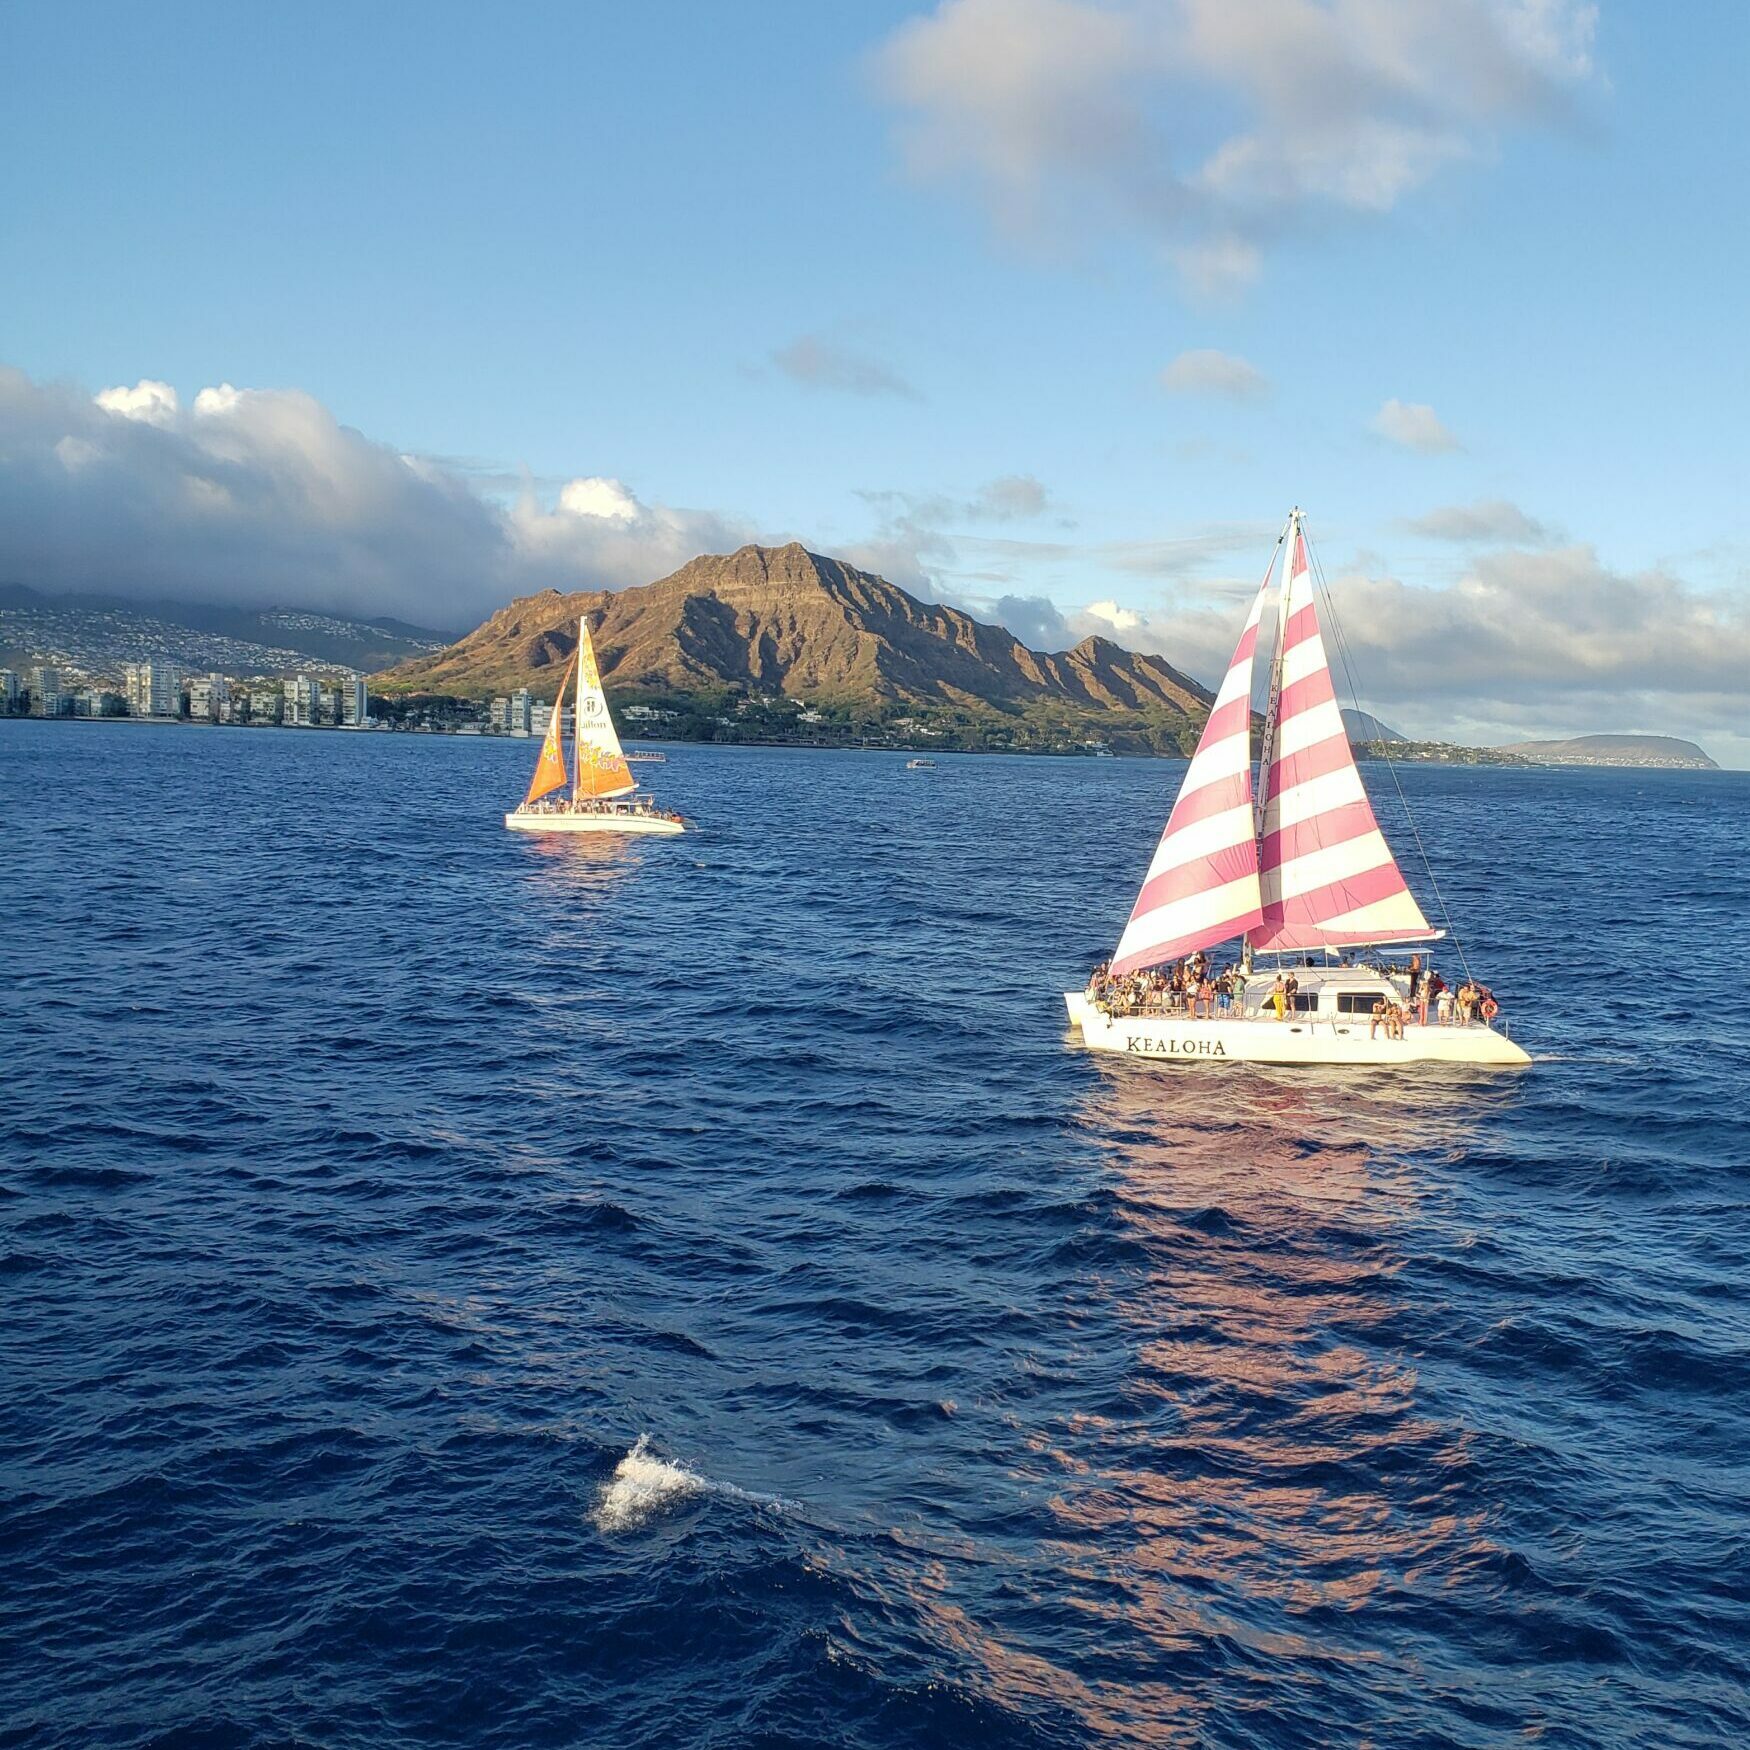 Ships sail Waikiki Harbor with Diamond Head Crater in the background